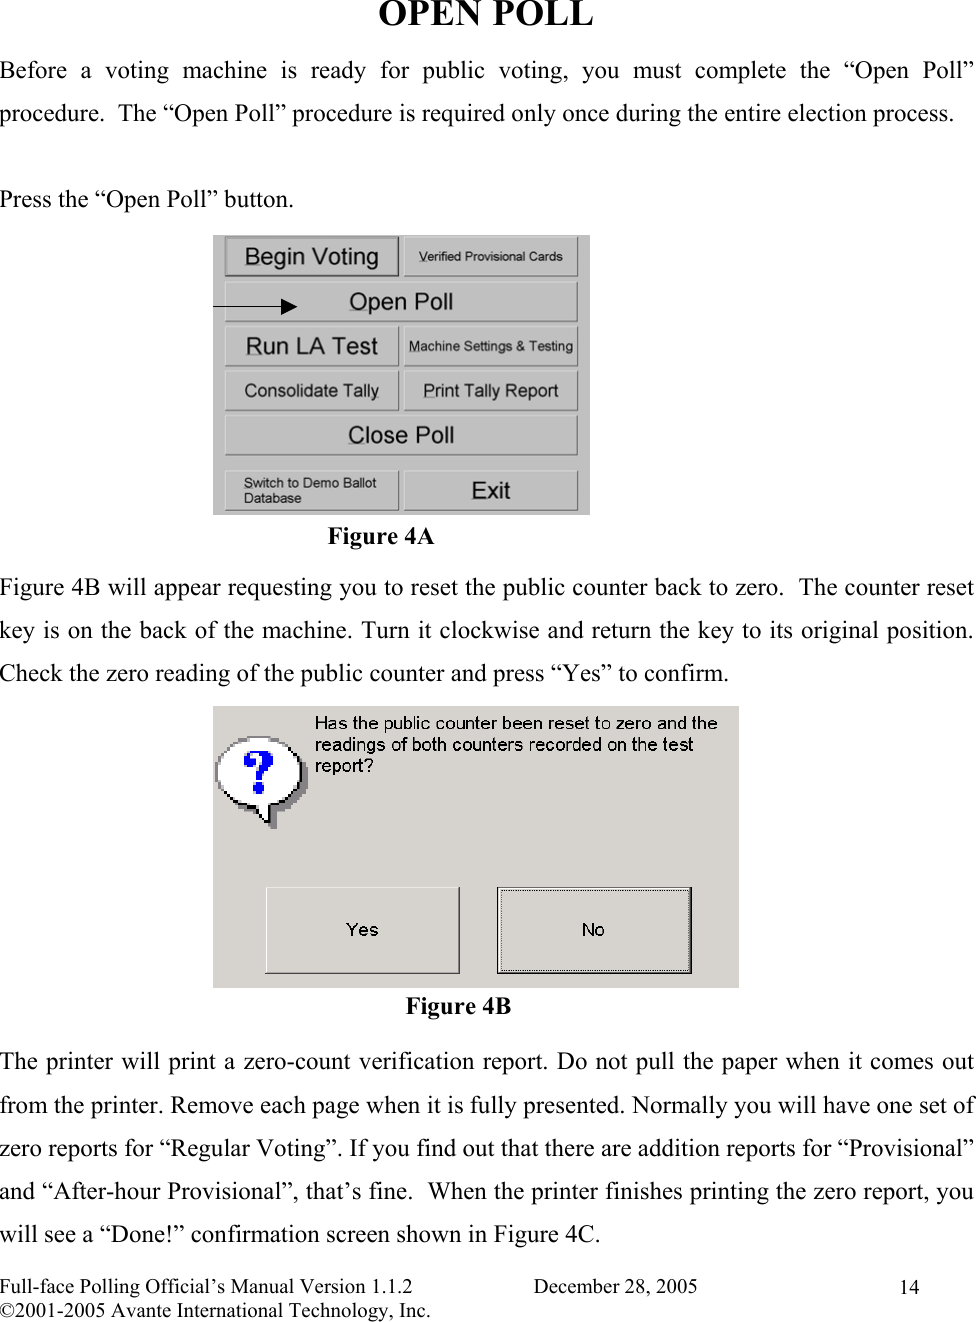    Full-face Polling Official’s Manual Version 1.1.2                       December 28, 2005 ©2001-2005 Avante International Technology, Inc.   14 OPEN POLL Before a voting machine is ready for public voting, you must complete the “Open Poll” procedure.  The “Open Poll” procedure is required only once during the entire election process.   Press the “Open Poll” button.          Figure 4B will appear requesting you to reset the public counter back to zero.  The counter reset key is on the back of the machine. Turn it clockwise and return the key to its original position.  Check the zero reading of the public counter and press “Yes” to confirm.         The printer will print a zero-count verification report. Do not pull the paper when it comes out from the printer. Remove each page when it is fully presented. Normally you will have one set of zero reports for “Regular Voting”. If you find out that there are addition reports for “Provisional” and “After-hour Provisional”, that’s fine.  When the printer finishes printing the zero report, you will see a “Done!” confirmation screen shown in Figure 4C. Figure 4B Figure 4A 